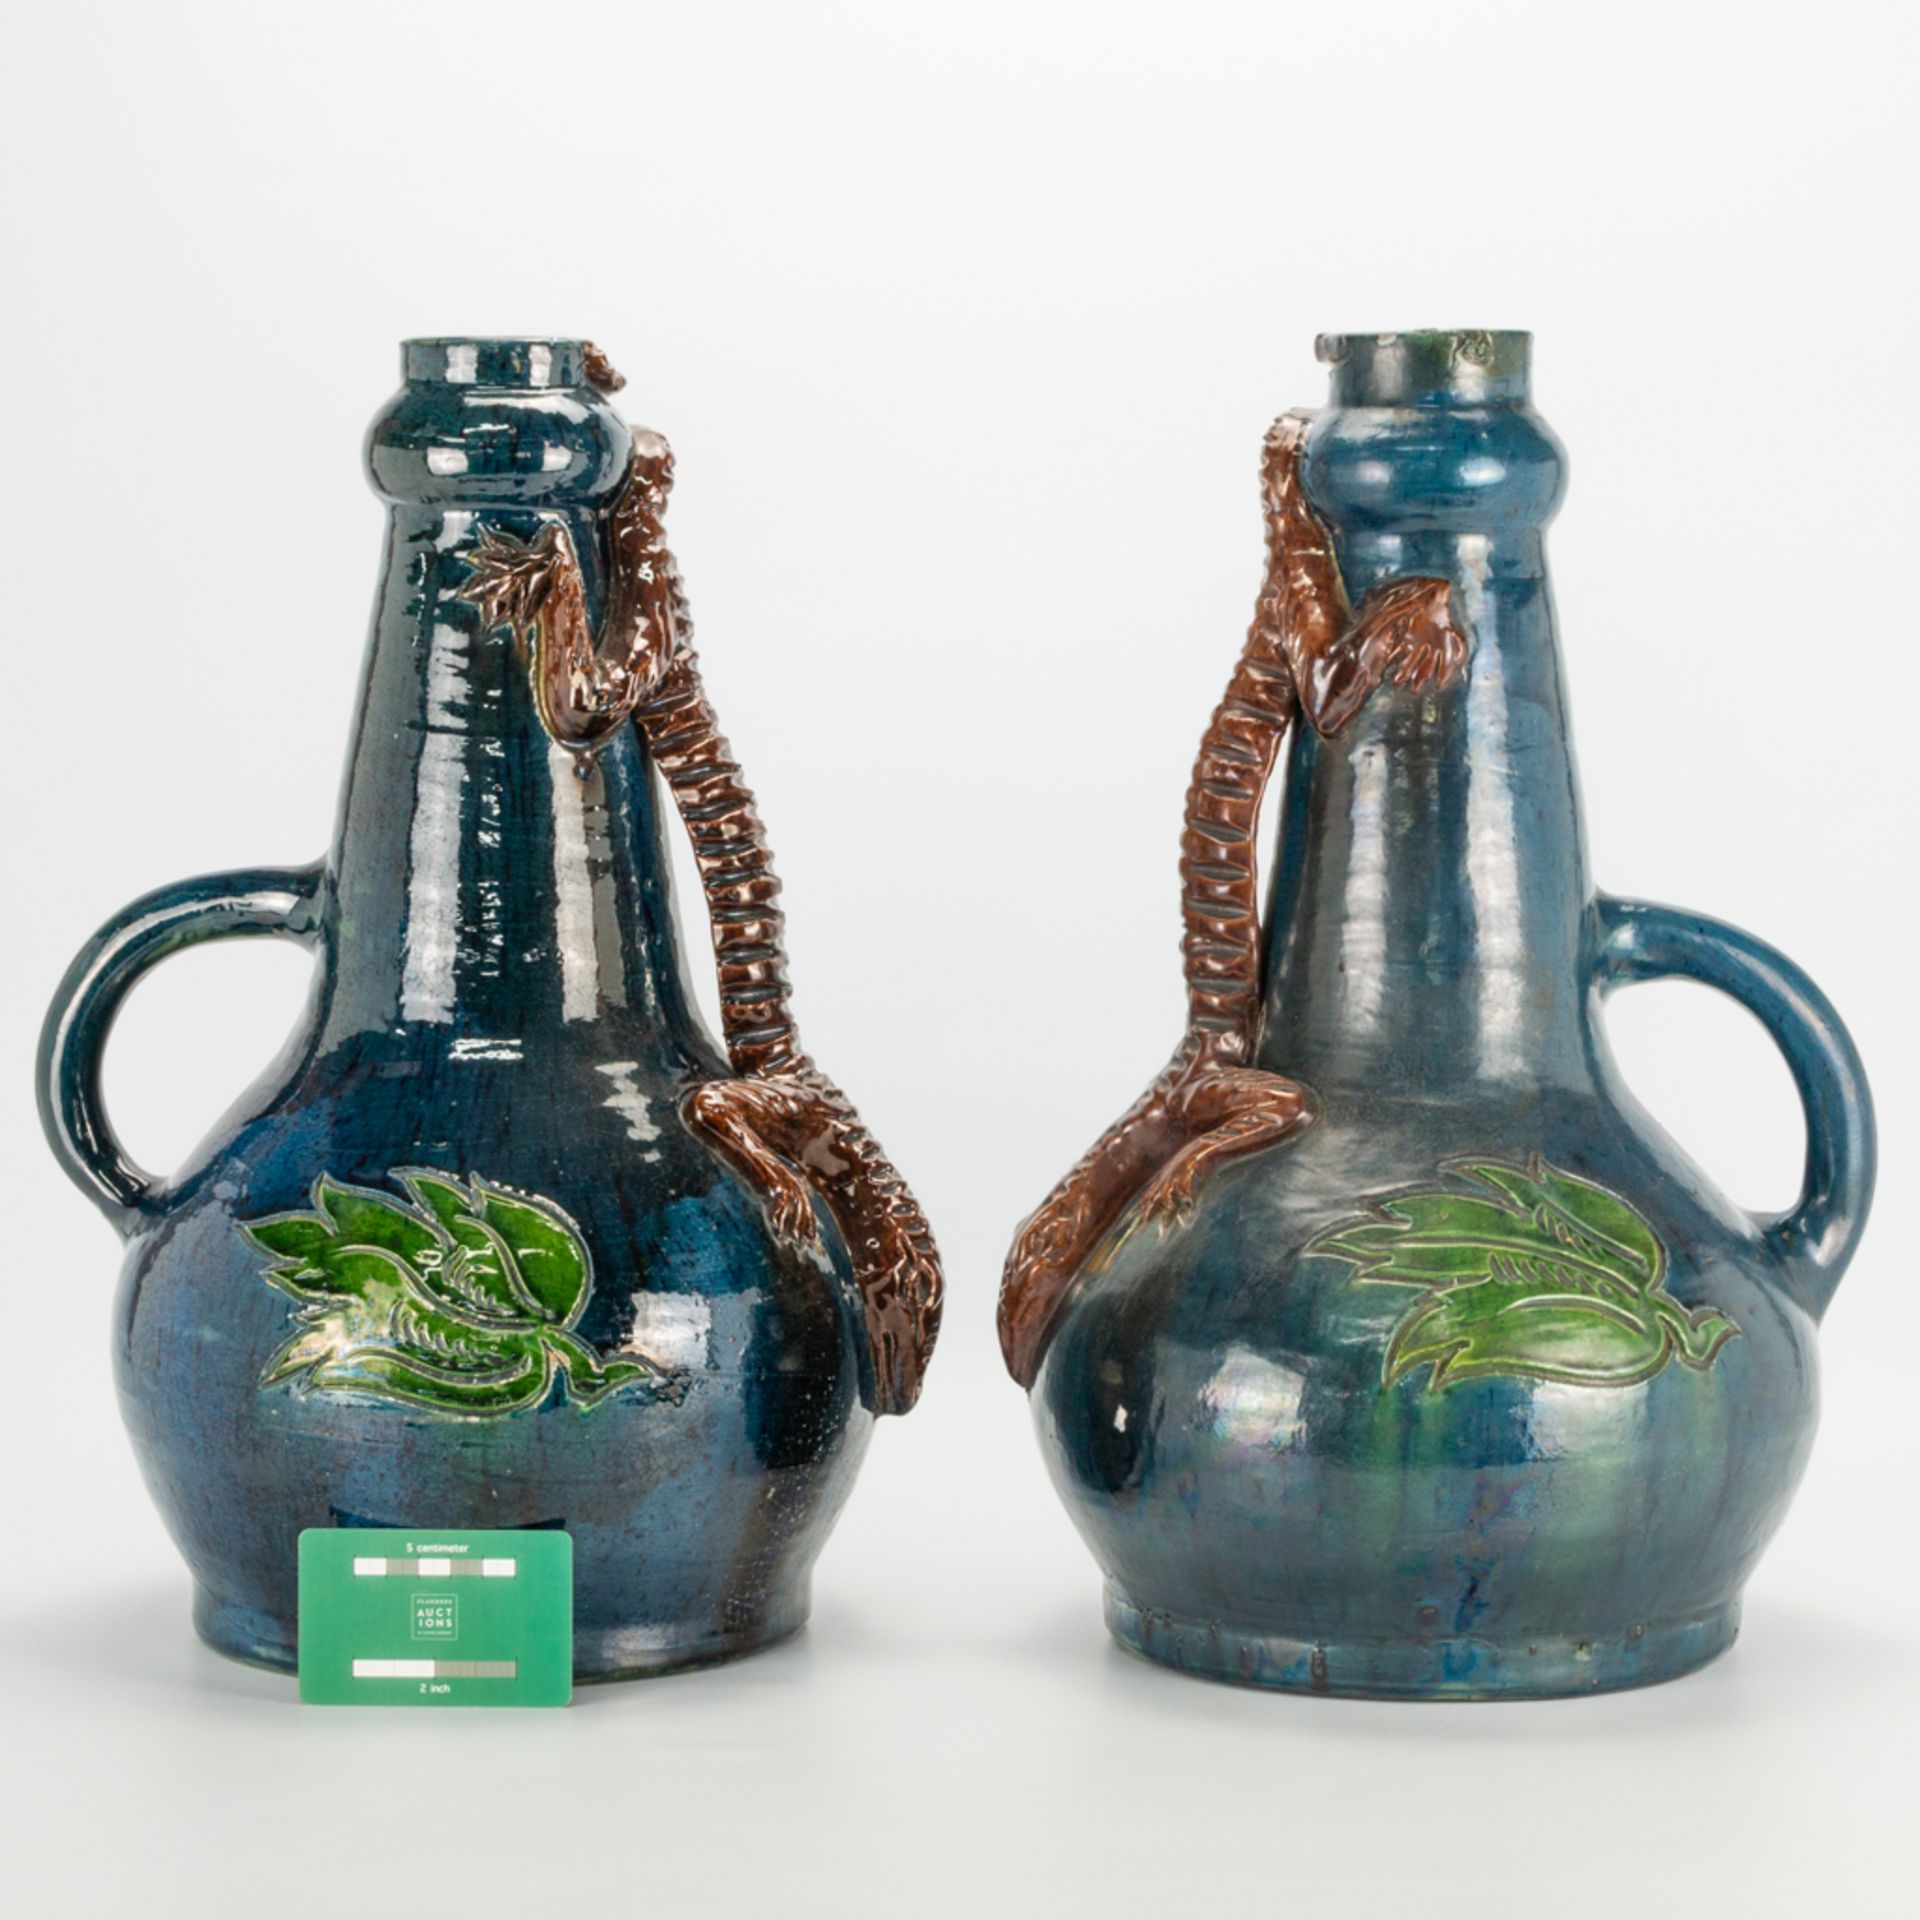 A pair of vases made in Flemish Earthenware with the decor of a salamander. (27 x 30 x 45 cm) - Image 2 of 20